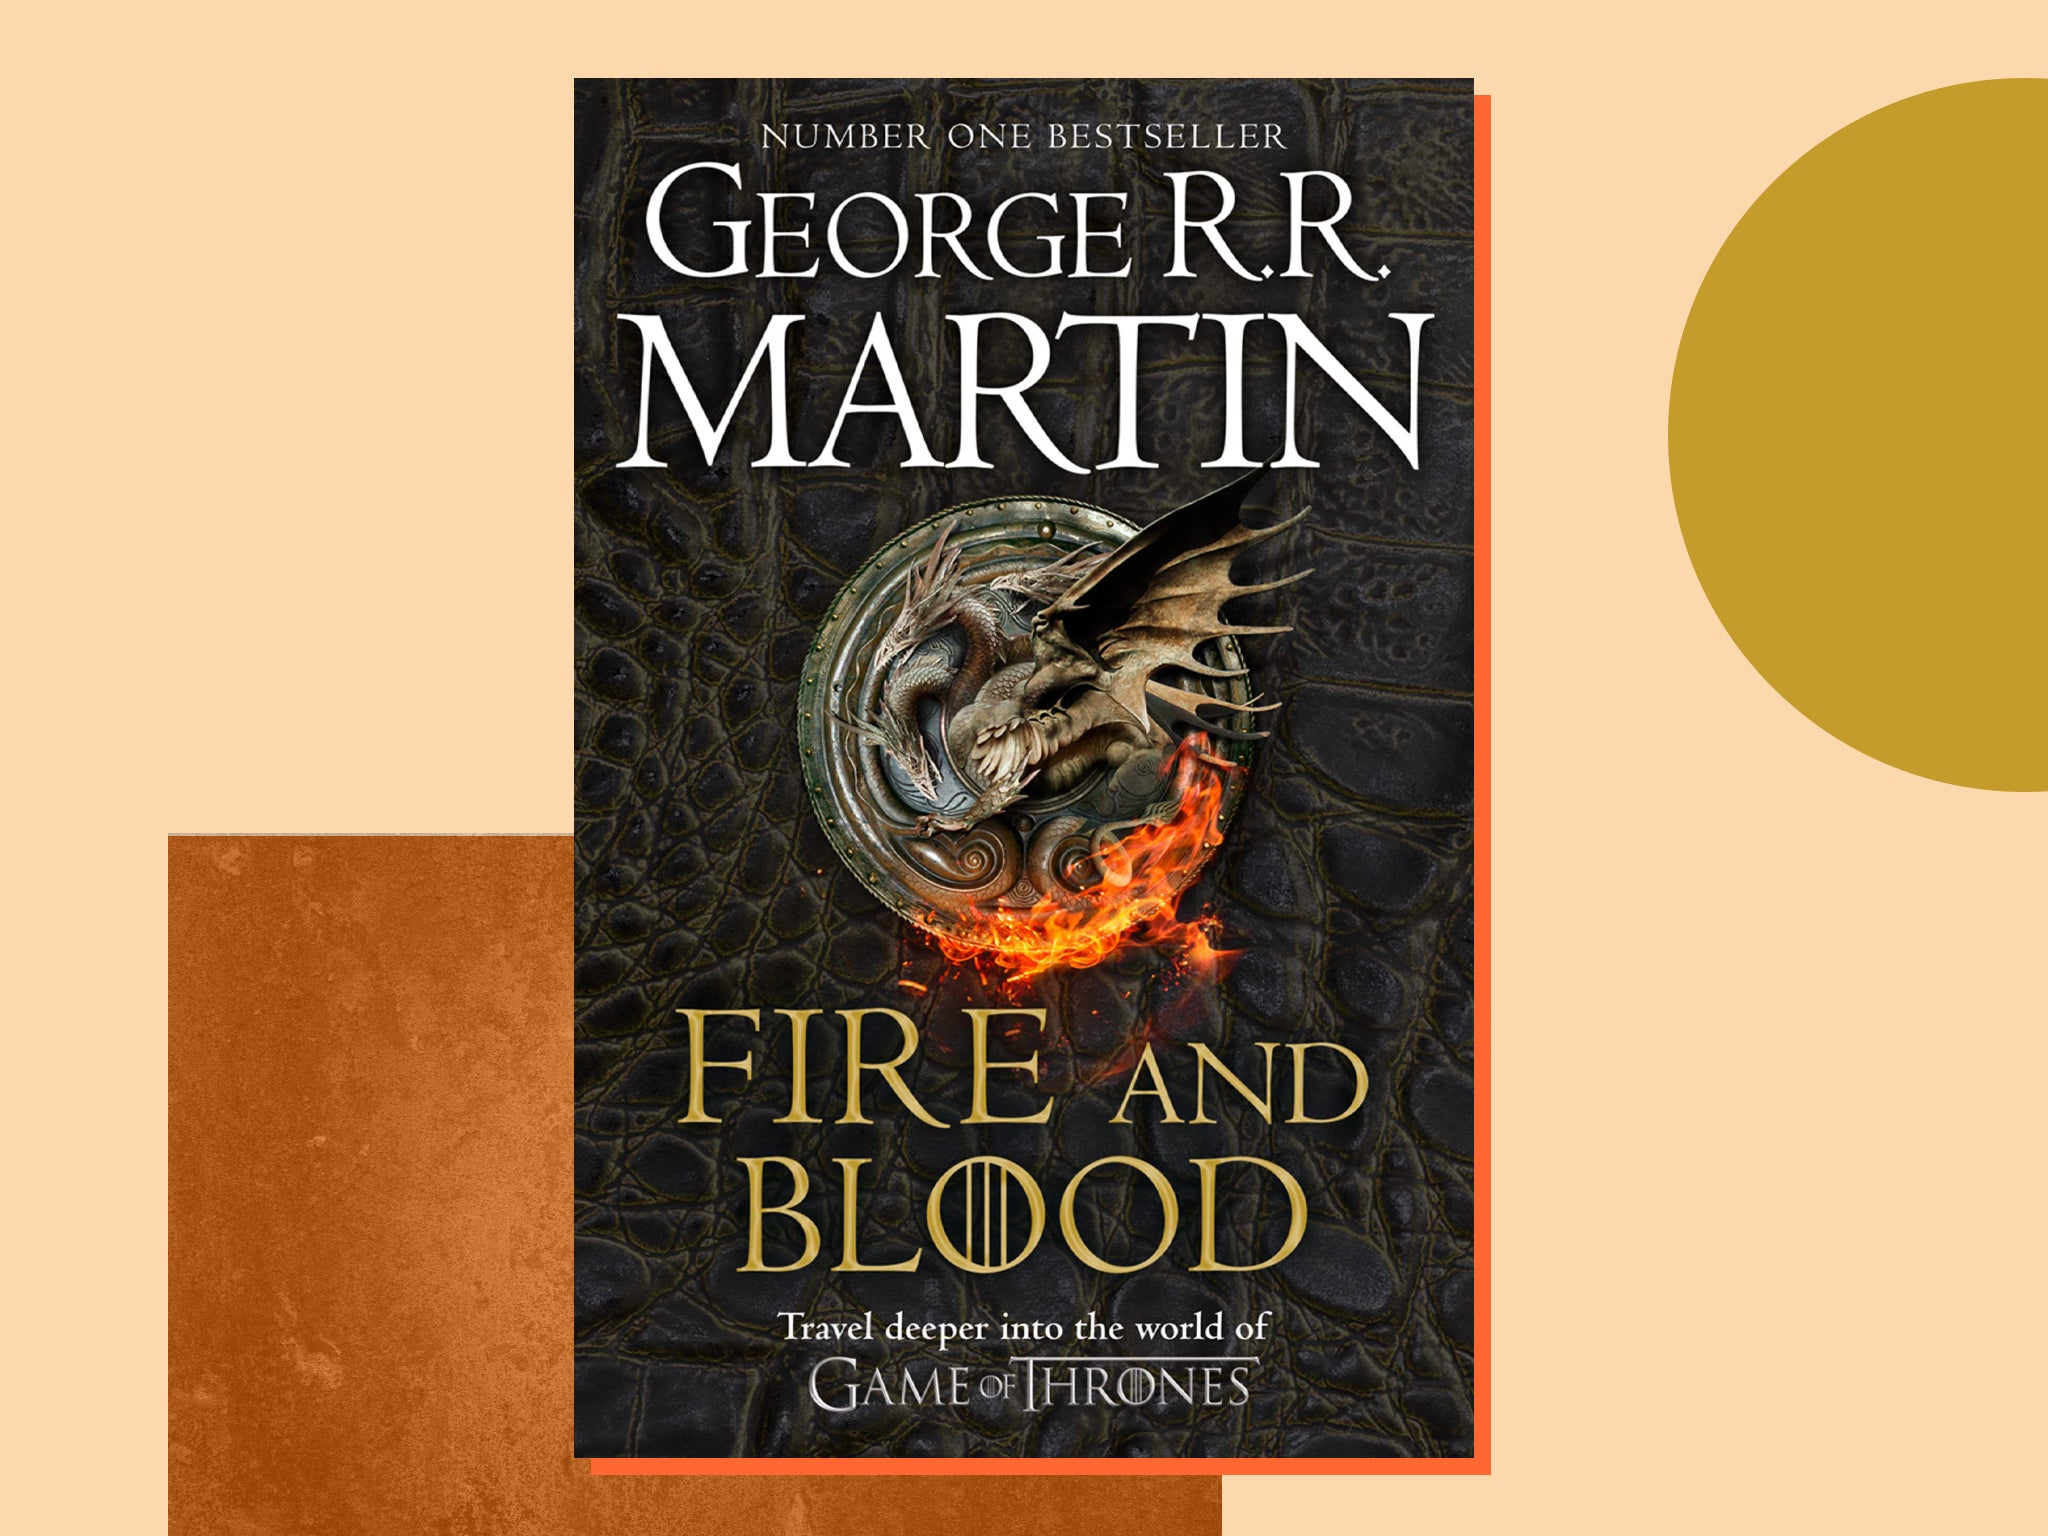 When Did Game of Thrones Books Come Out? A Timeline of Release Dates